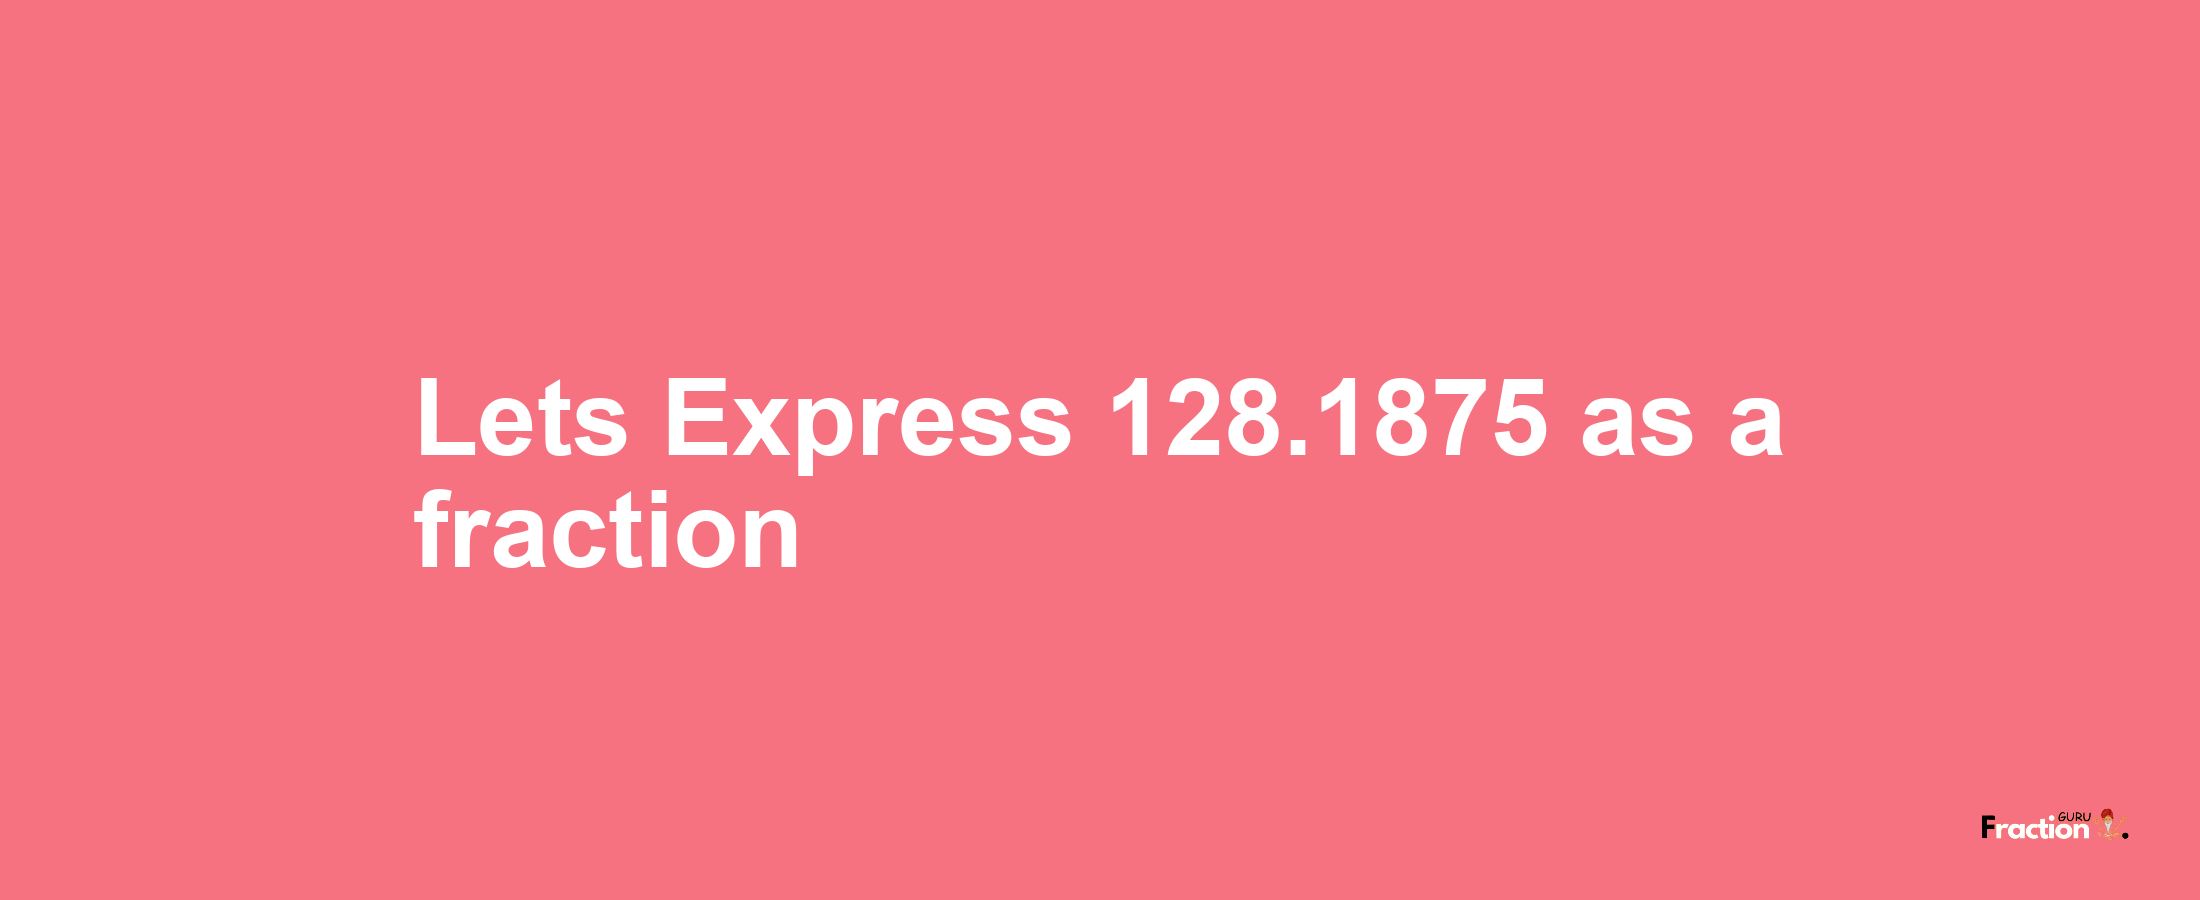 Lets Express 128.1875 as afraction